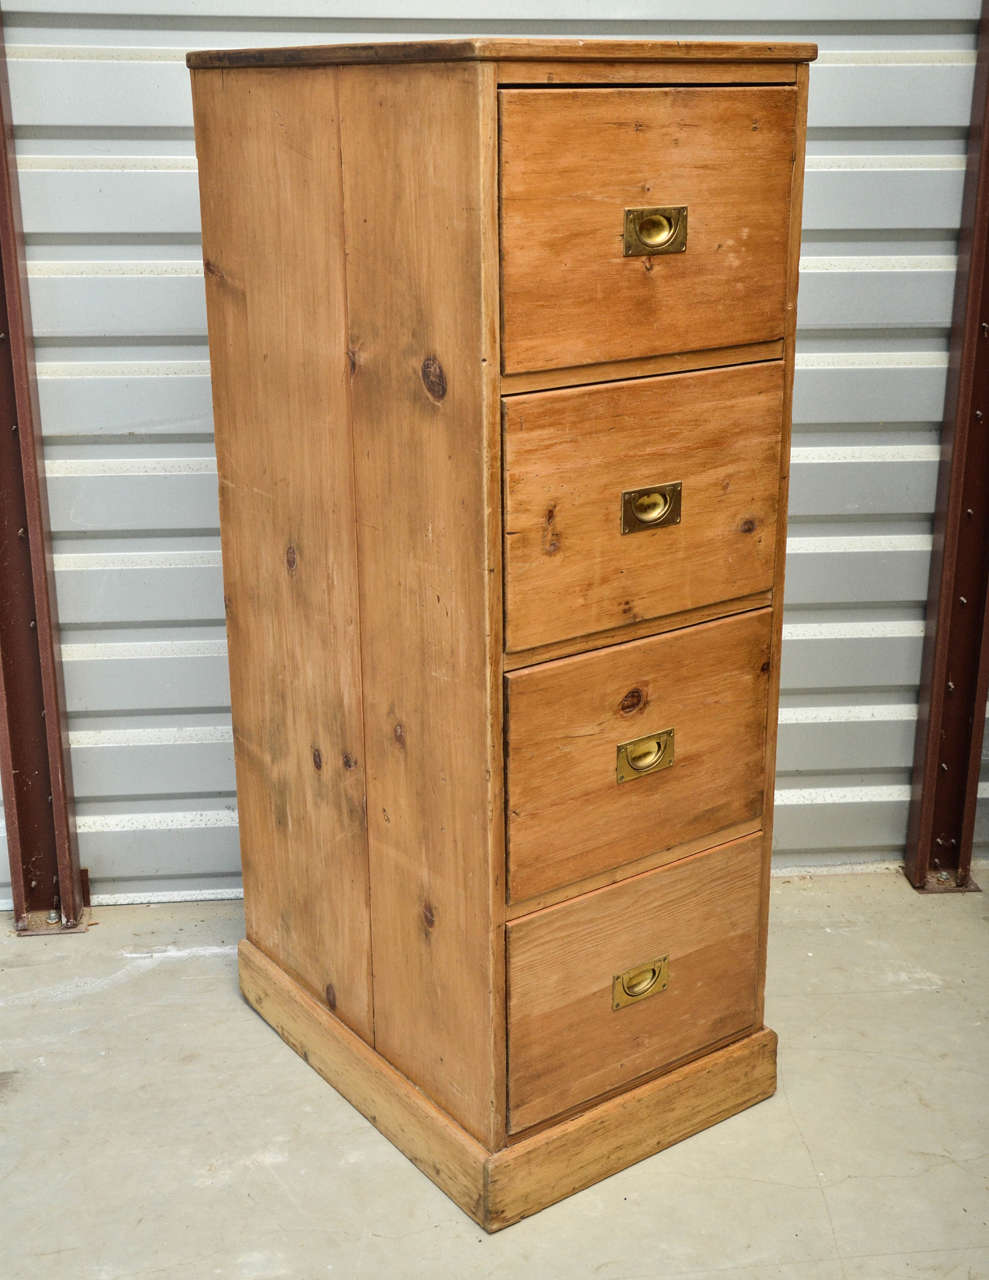 English Edwardian four-drawer pine file cabinet with four dovetailed drawers, having recessed brass Campaign pulls. Each drawer has a sliding file divider. Great as intended for files, toys or any other kind of storage.